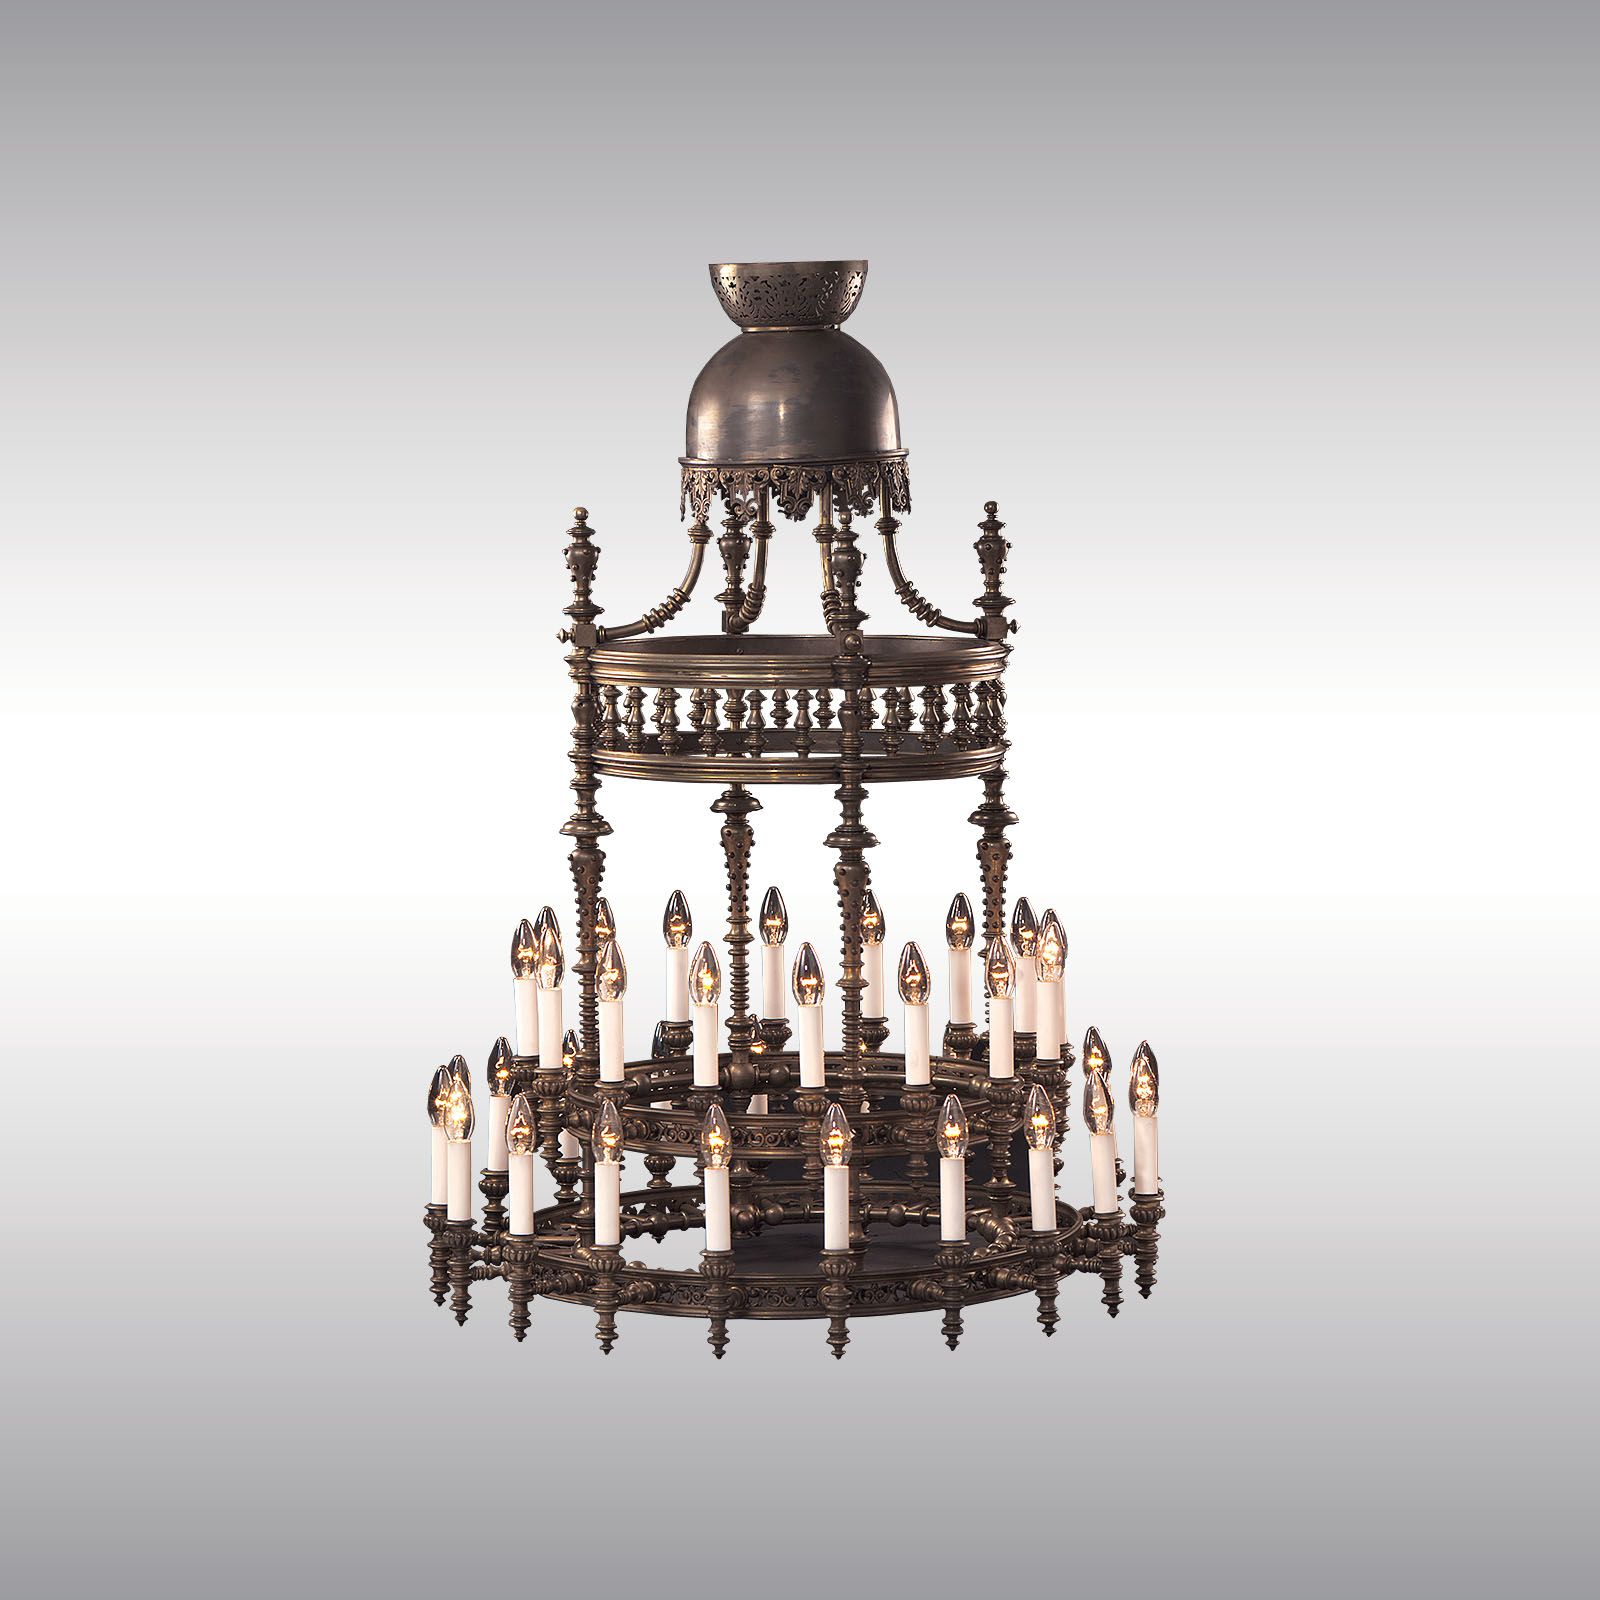 WOKA LAMPS VIENNA - OrderNr.:  70003|Otto Wagner privat Dining Chandelier